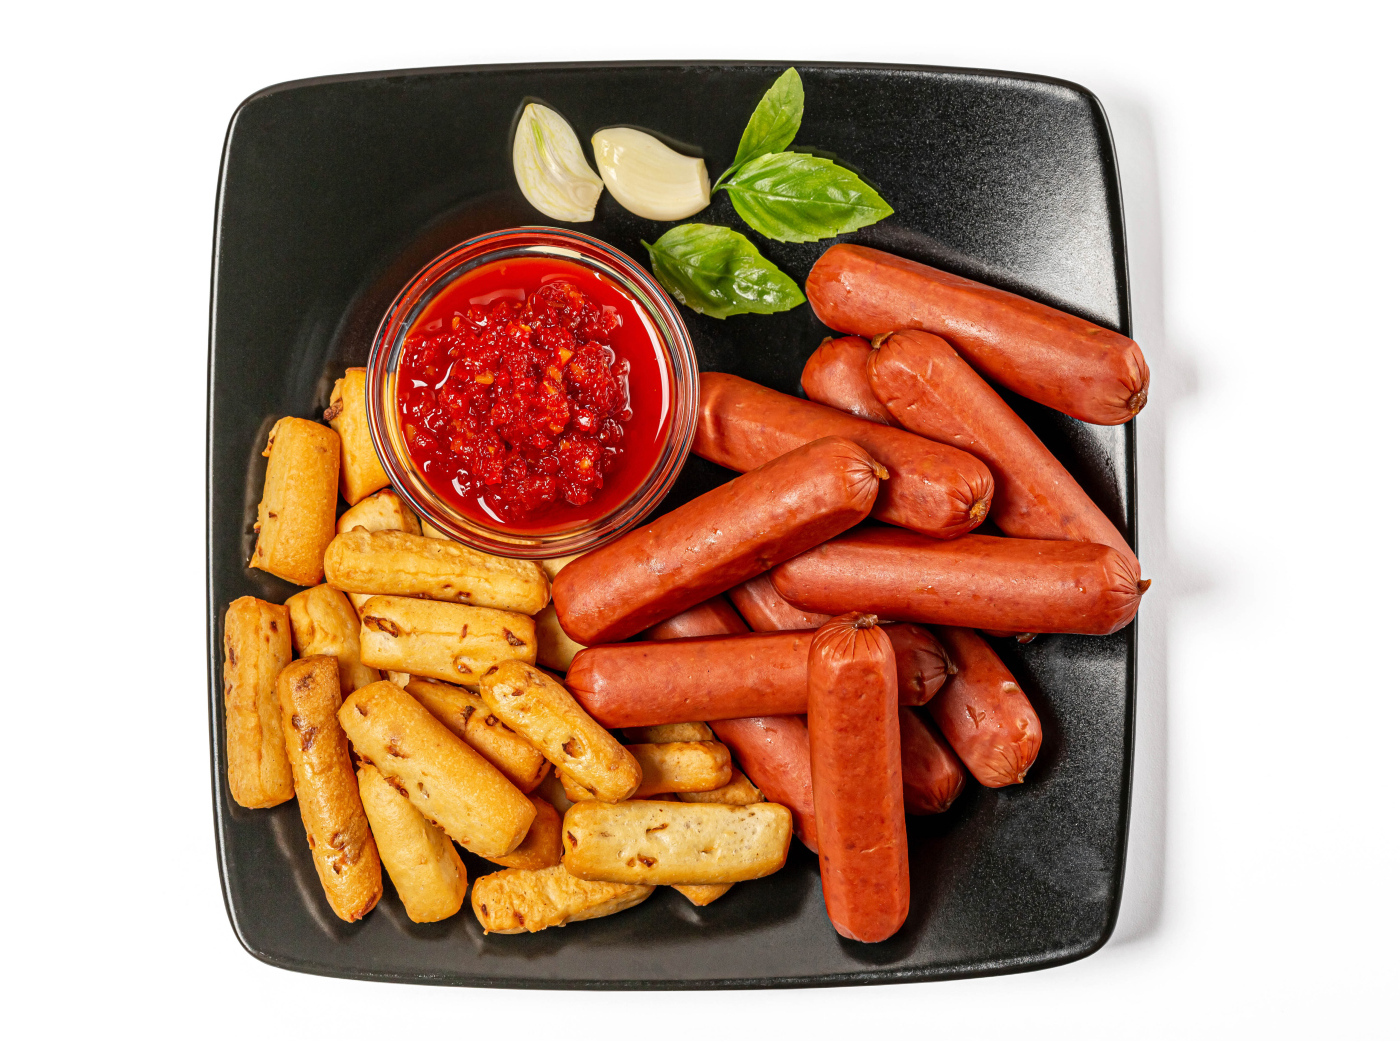 Hot sausages with pastries on a plate